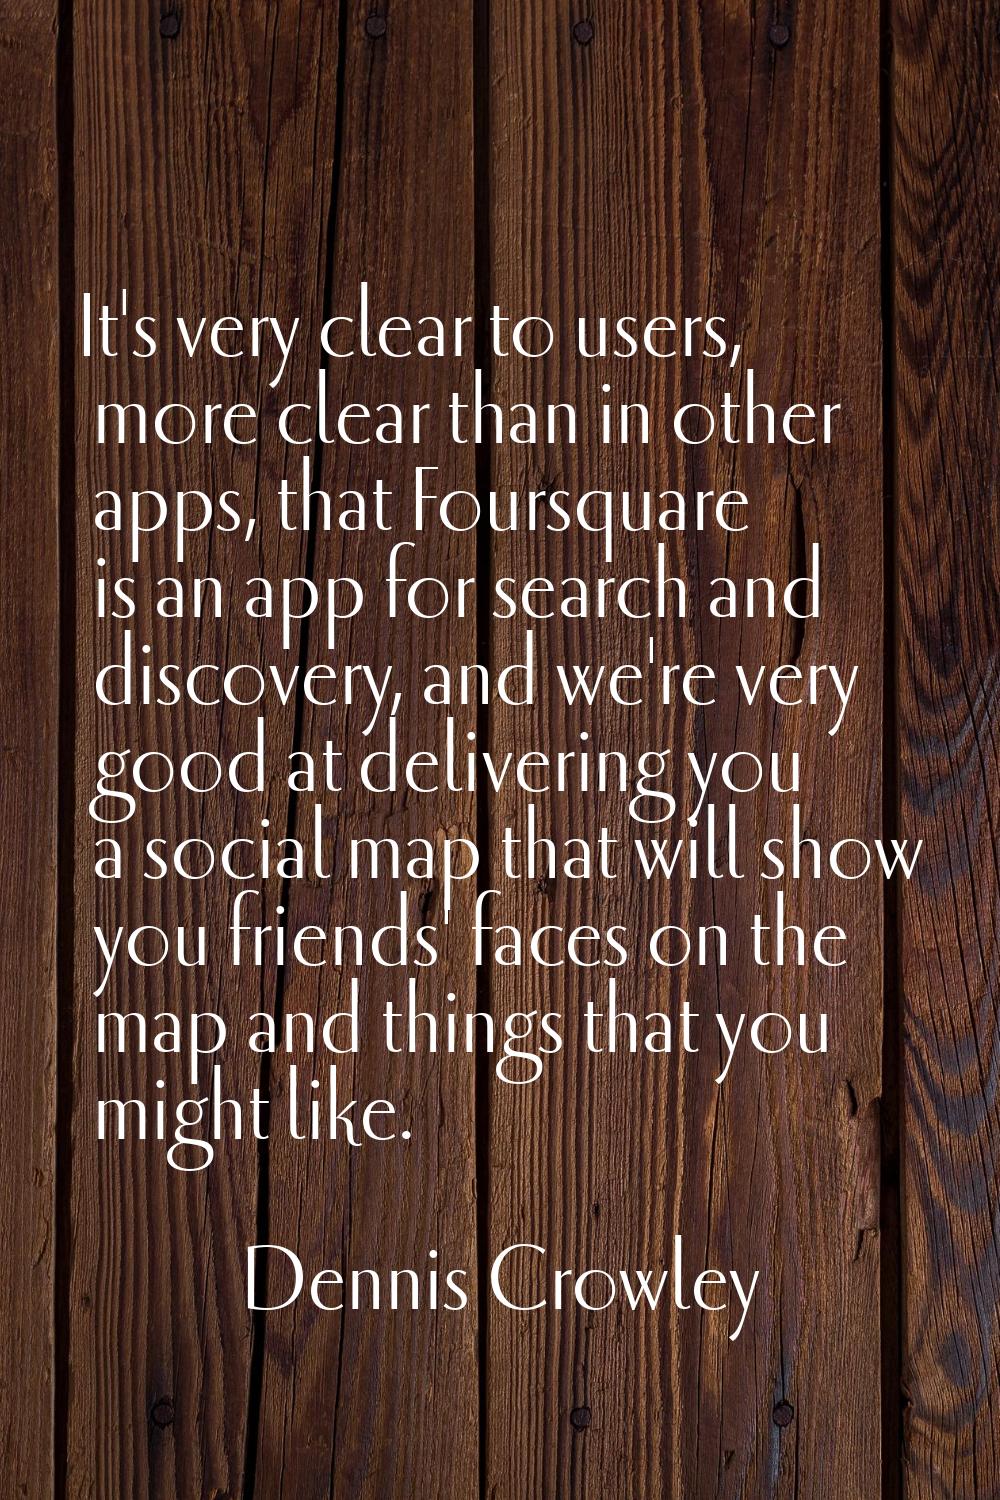 It's very clear to users, more clear than in other apps, that Foursquare is an app for search and d